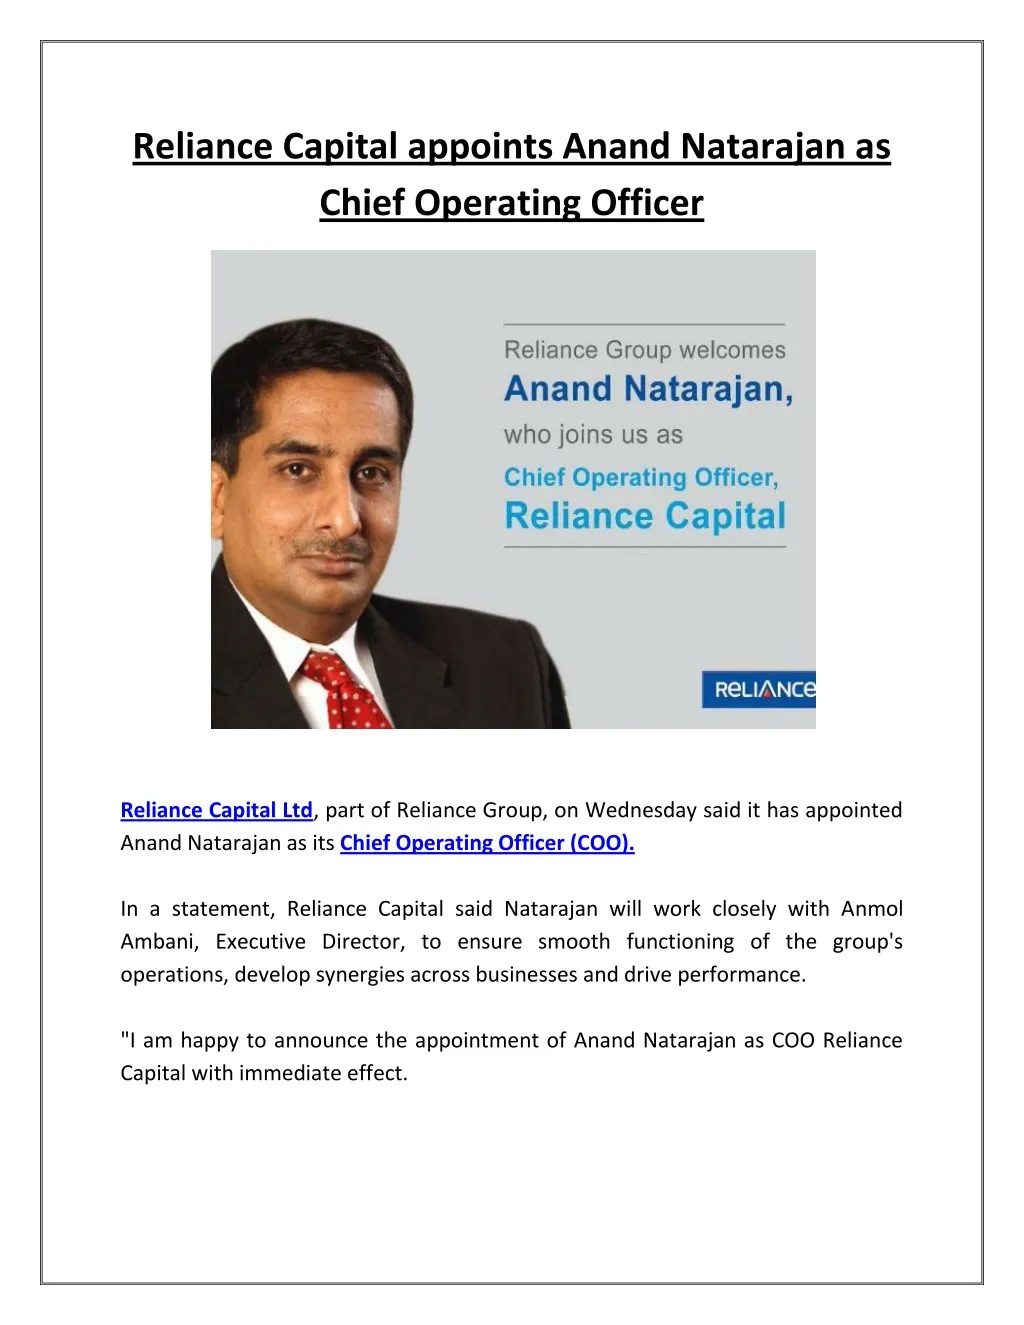 reliance capital appoints anand natarajan